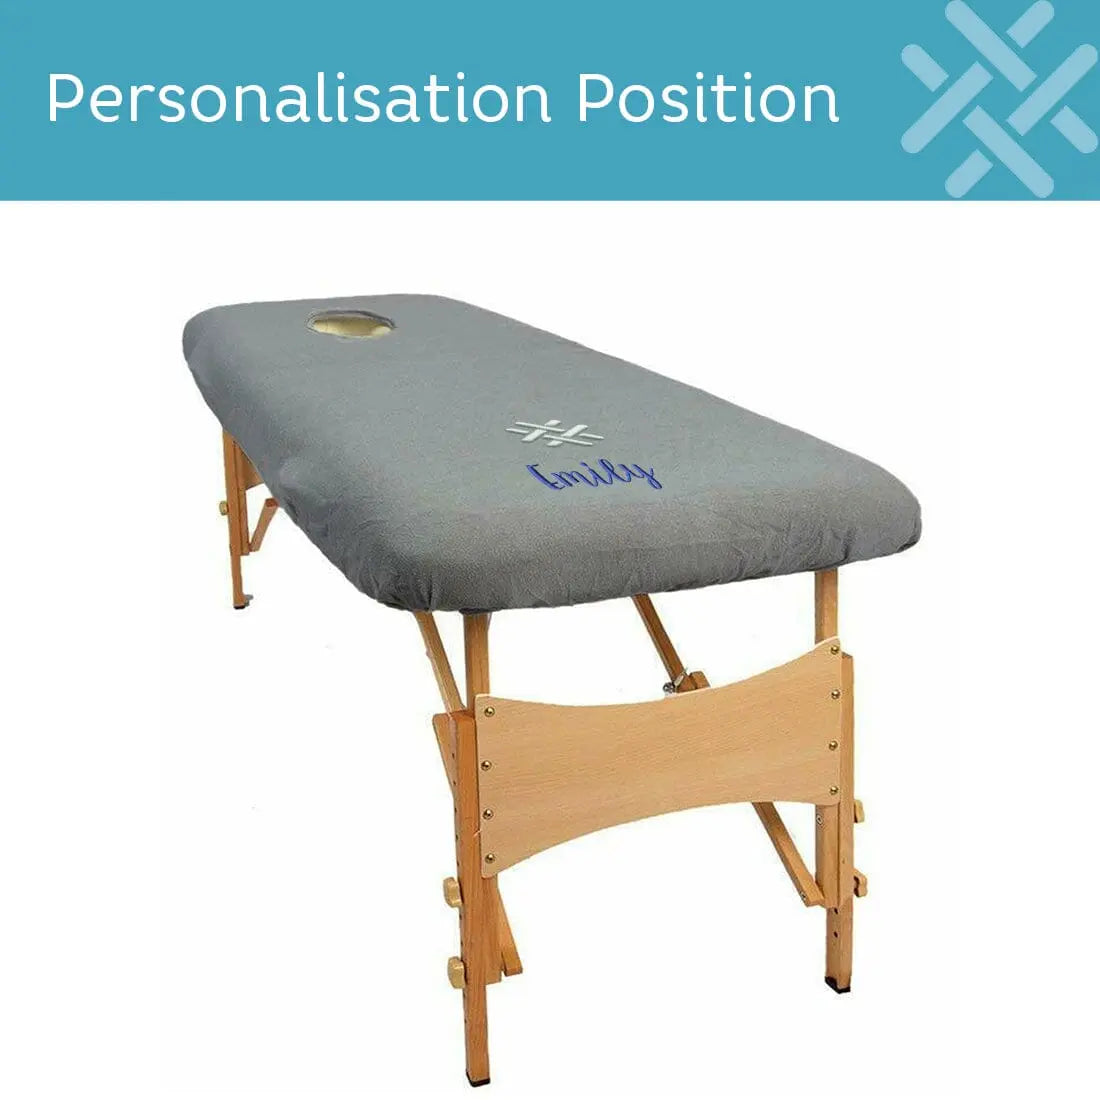 Personalisation position